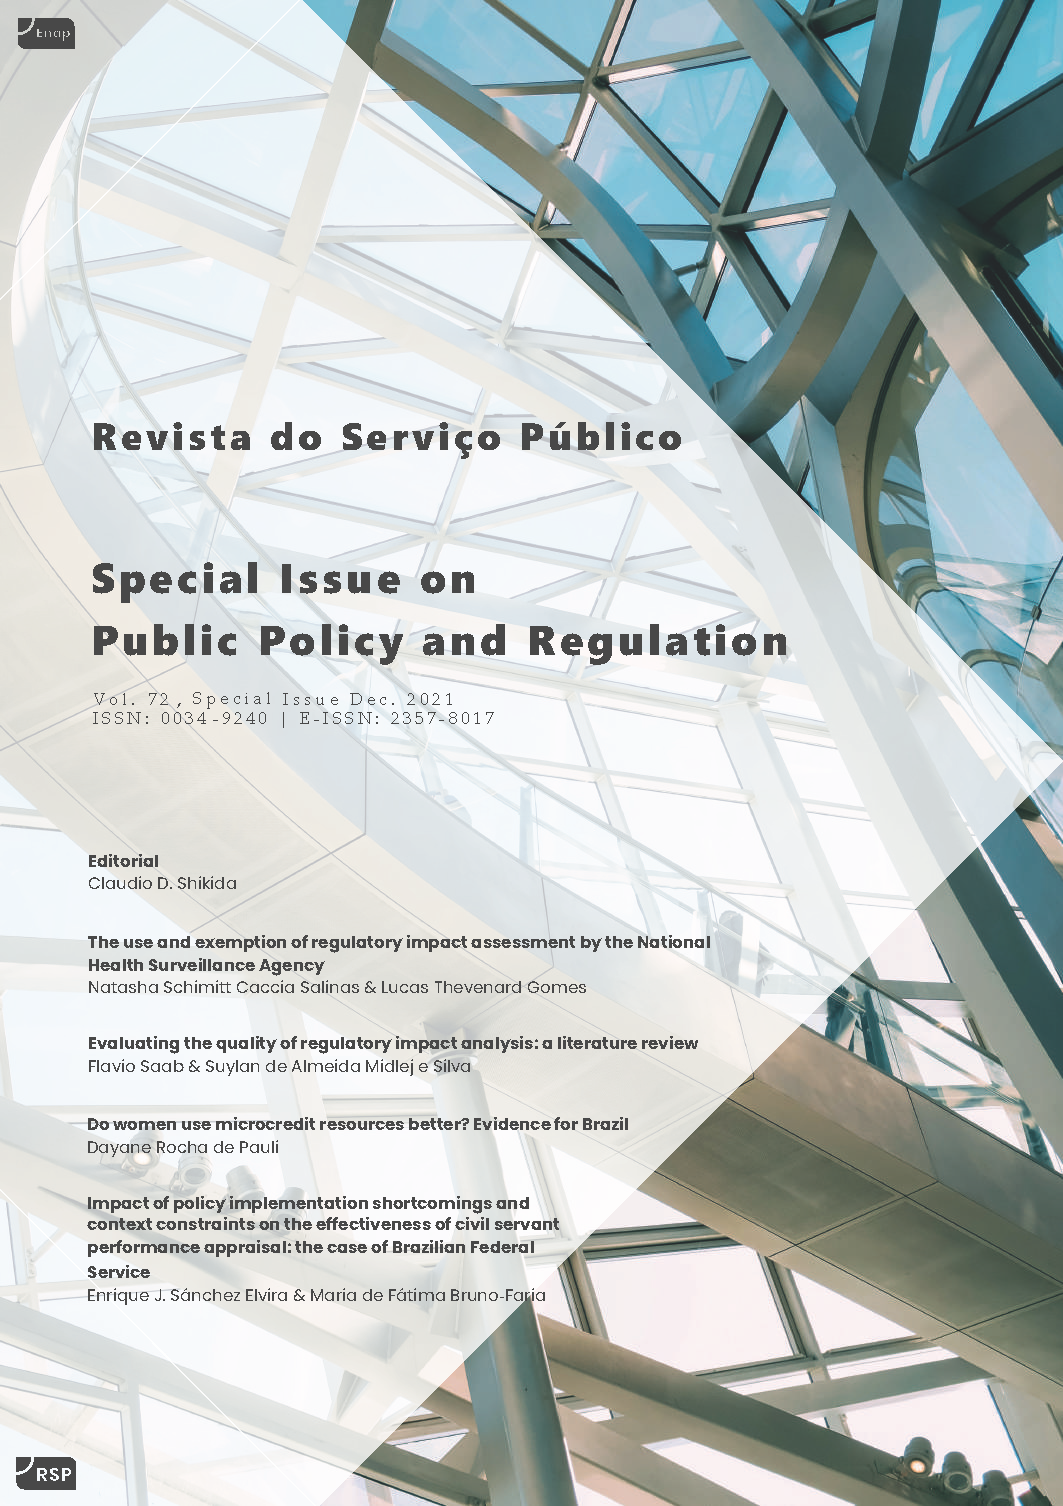 					Visualizar v. 72 (2021): Special Issue on Public Policy and Regulation
				